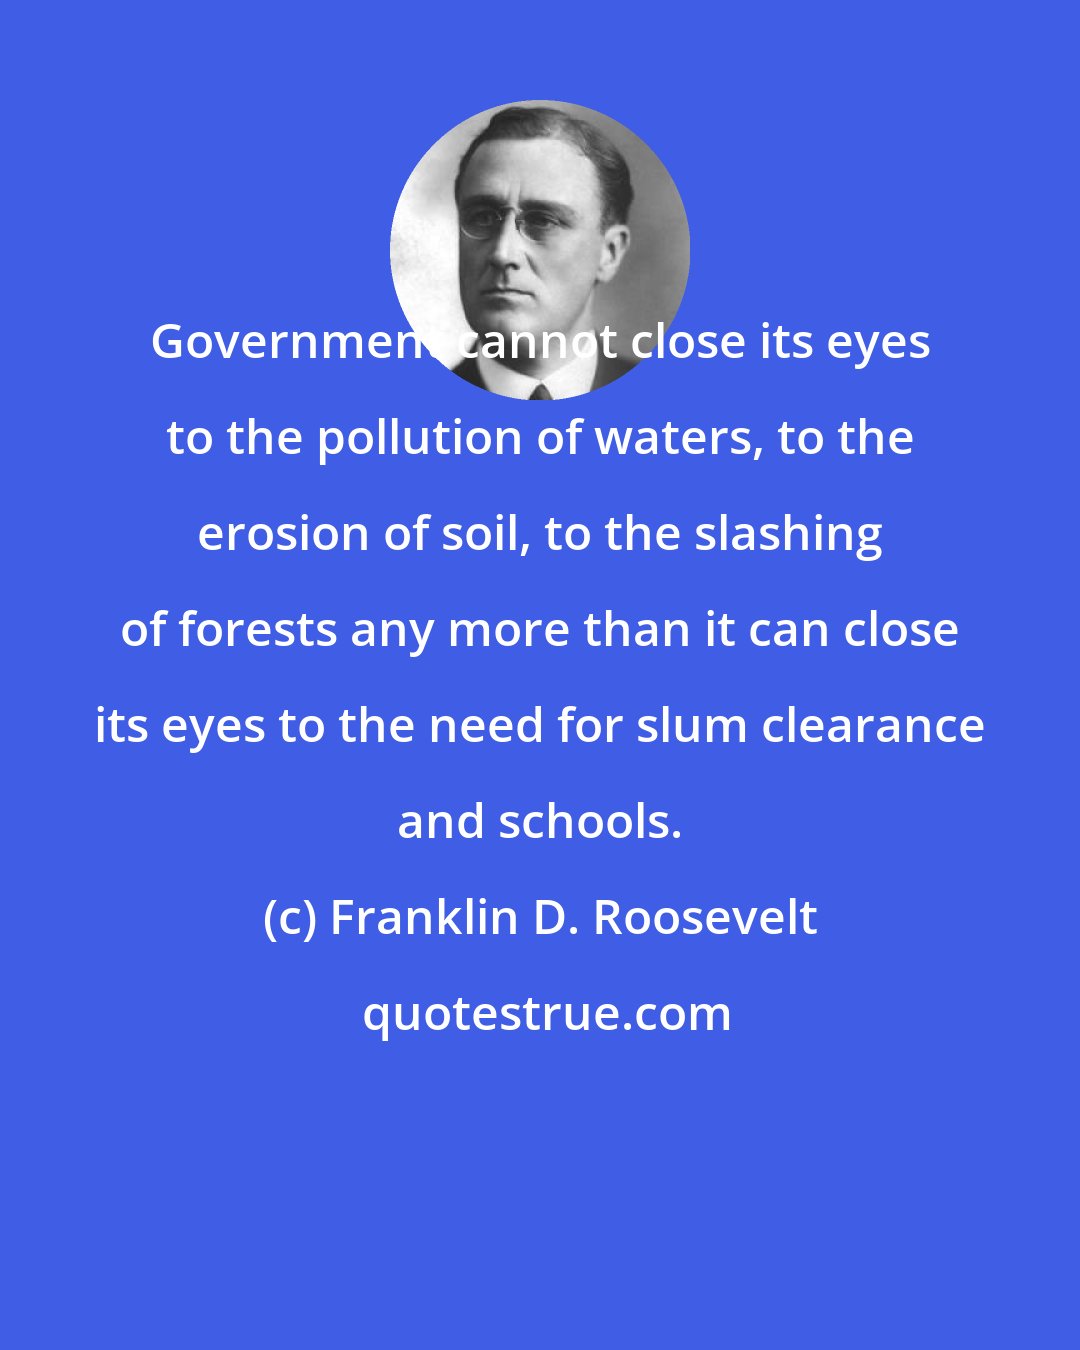 Franklin D. Roosevelt: Government cannot close its eyes to the pollution of waters, to the erosion of soil, to the slashing of forests any more than it can close its eyes to the need for slum clearance and schools.